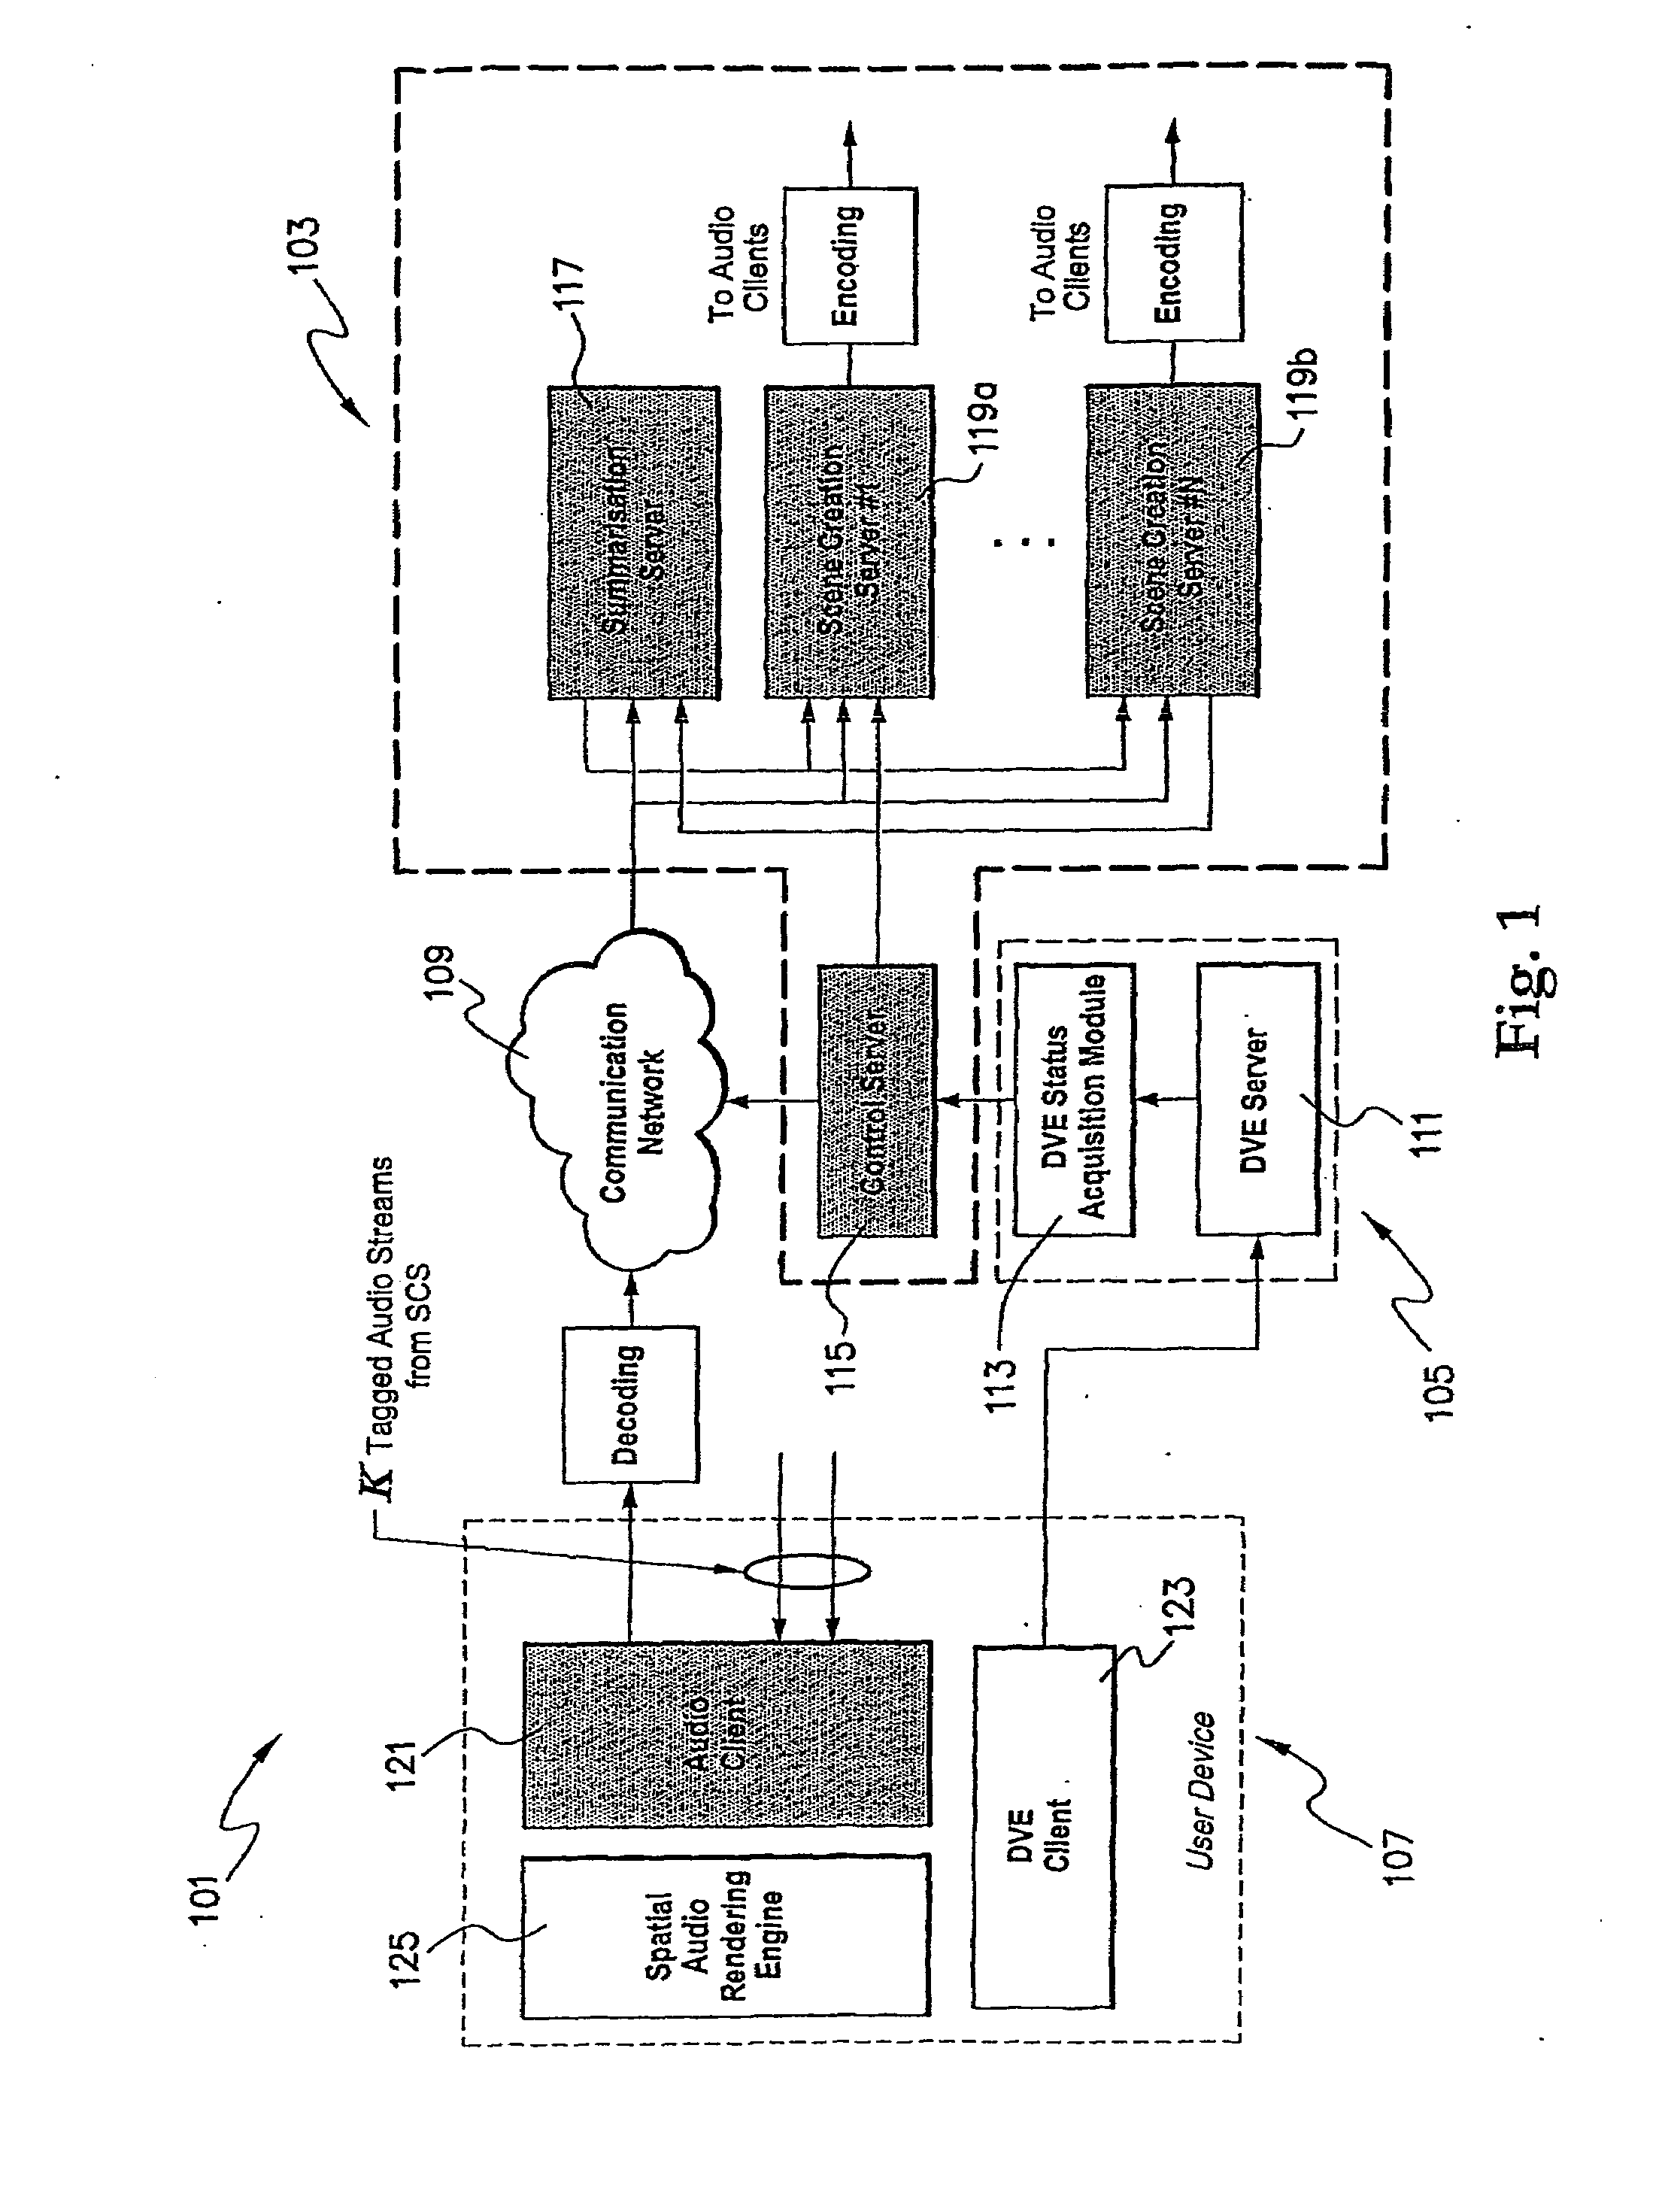 Apparatuses and Methods for Use in Creating an Audio Scene